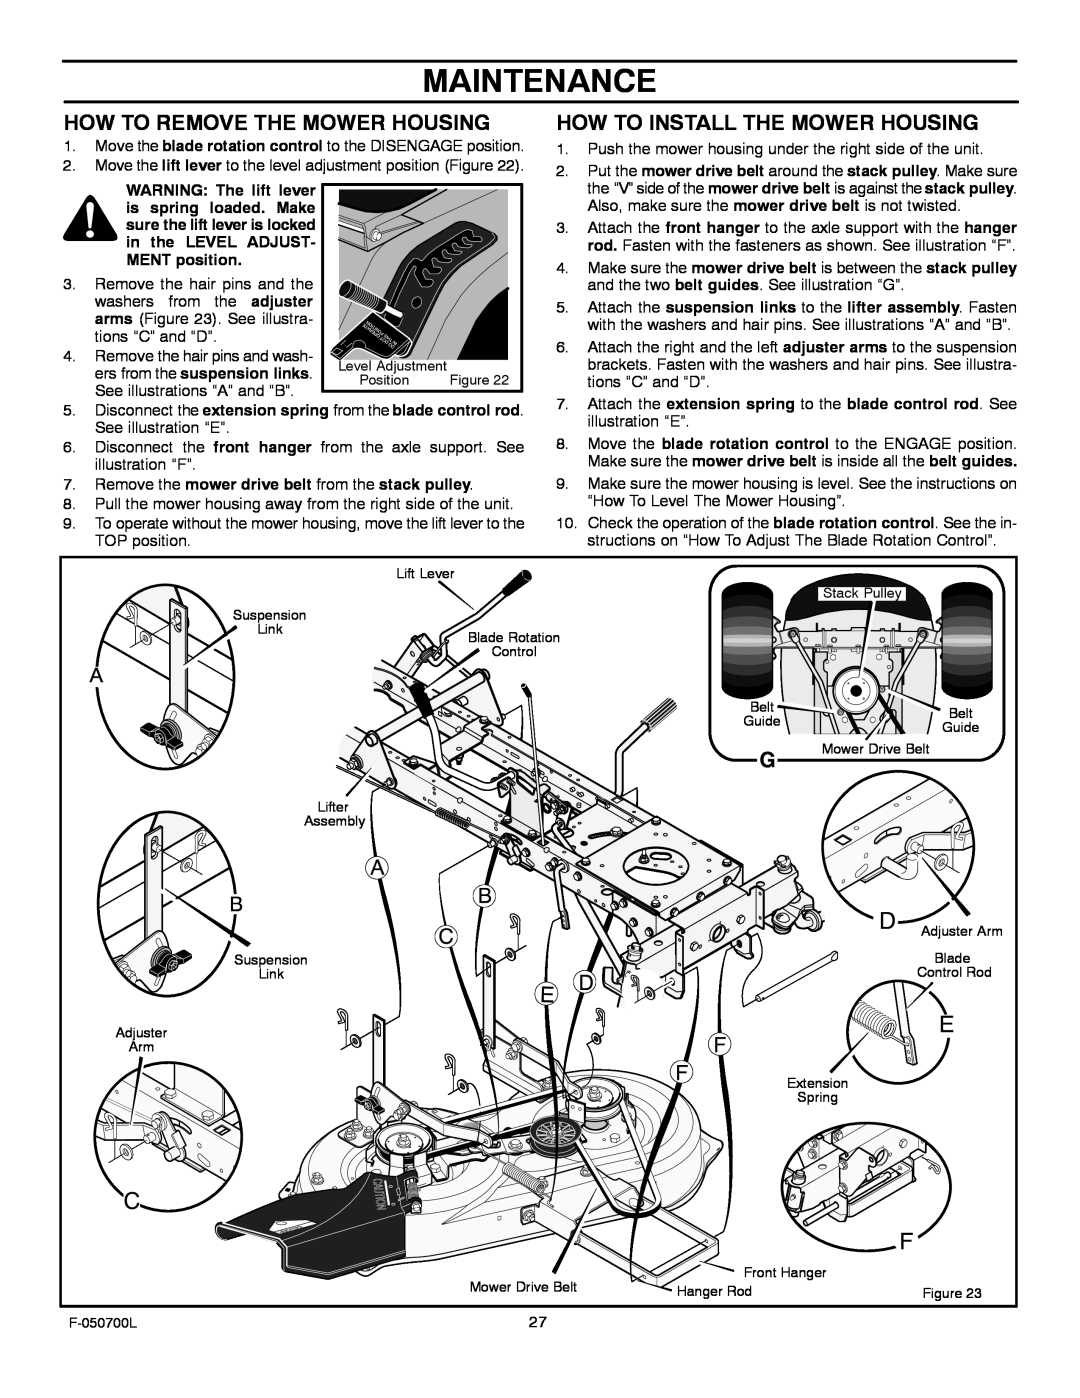 Murray 405000x8E manual Maintenance, How To Remove The Mower Housing, How To Install The Mower Housing 